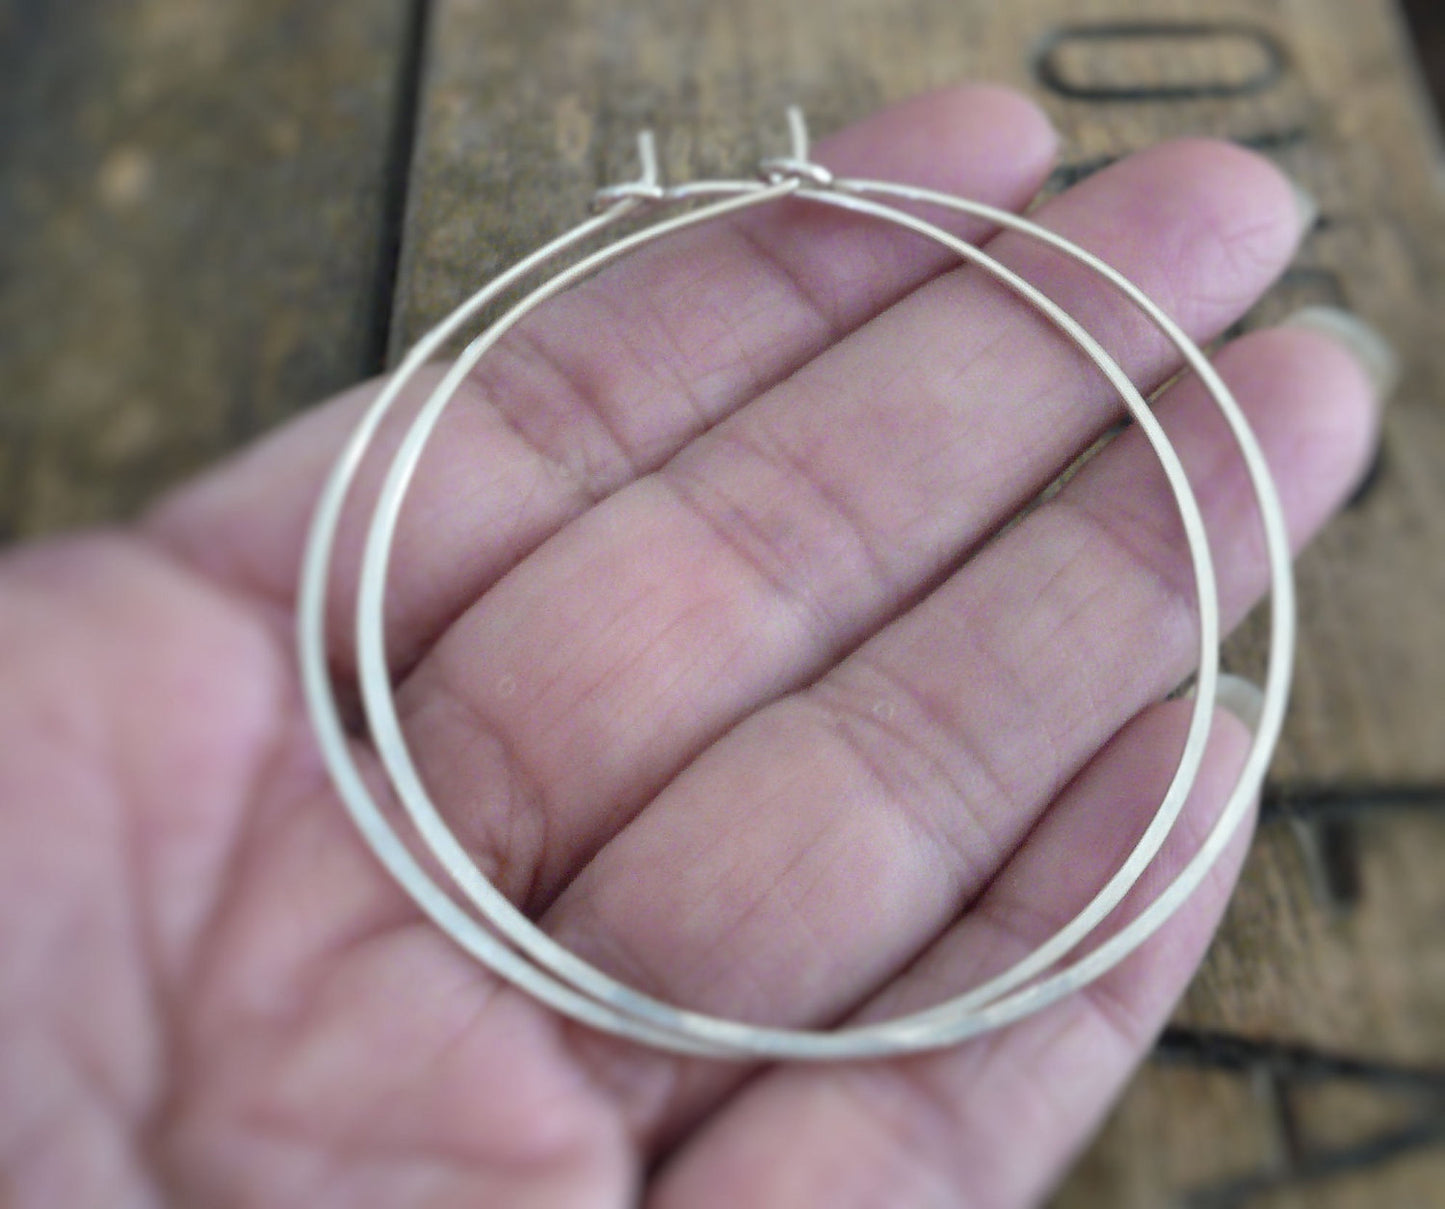 BIG Every Day Hoops - Handmade. Sterling Silver or 14kt Goldfill. 2 inch Hoops